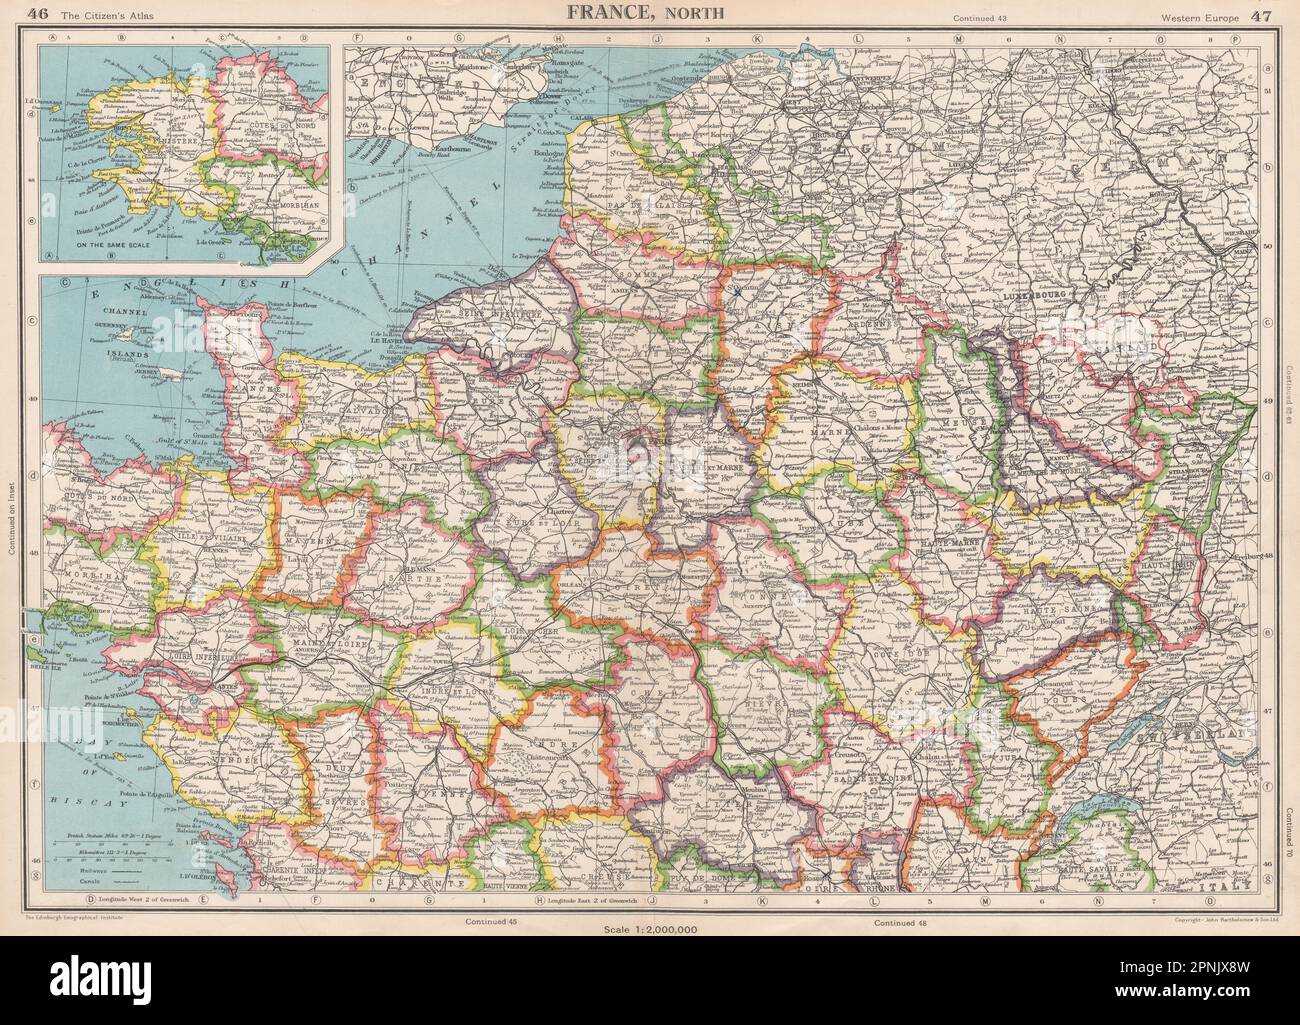 FRANCE NORTH. Shows French-occupied Saarland protectorate. BARTHOLOMEW 1952 map Stock Photo